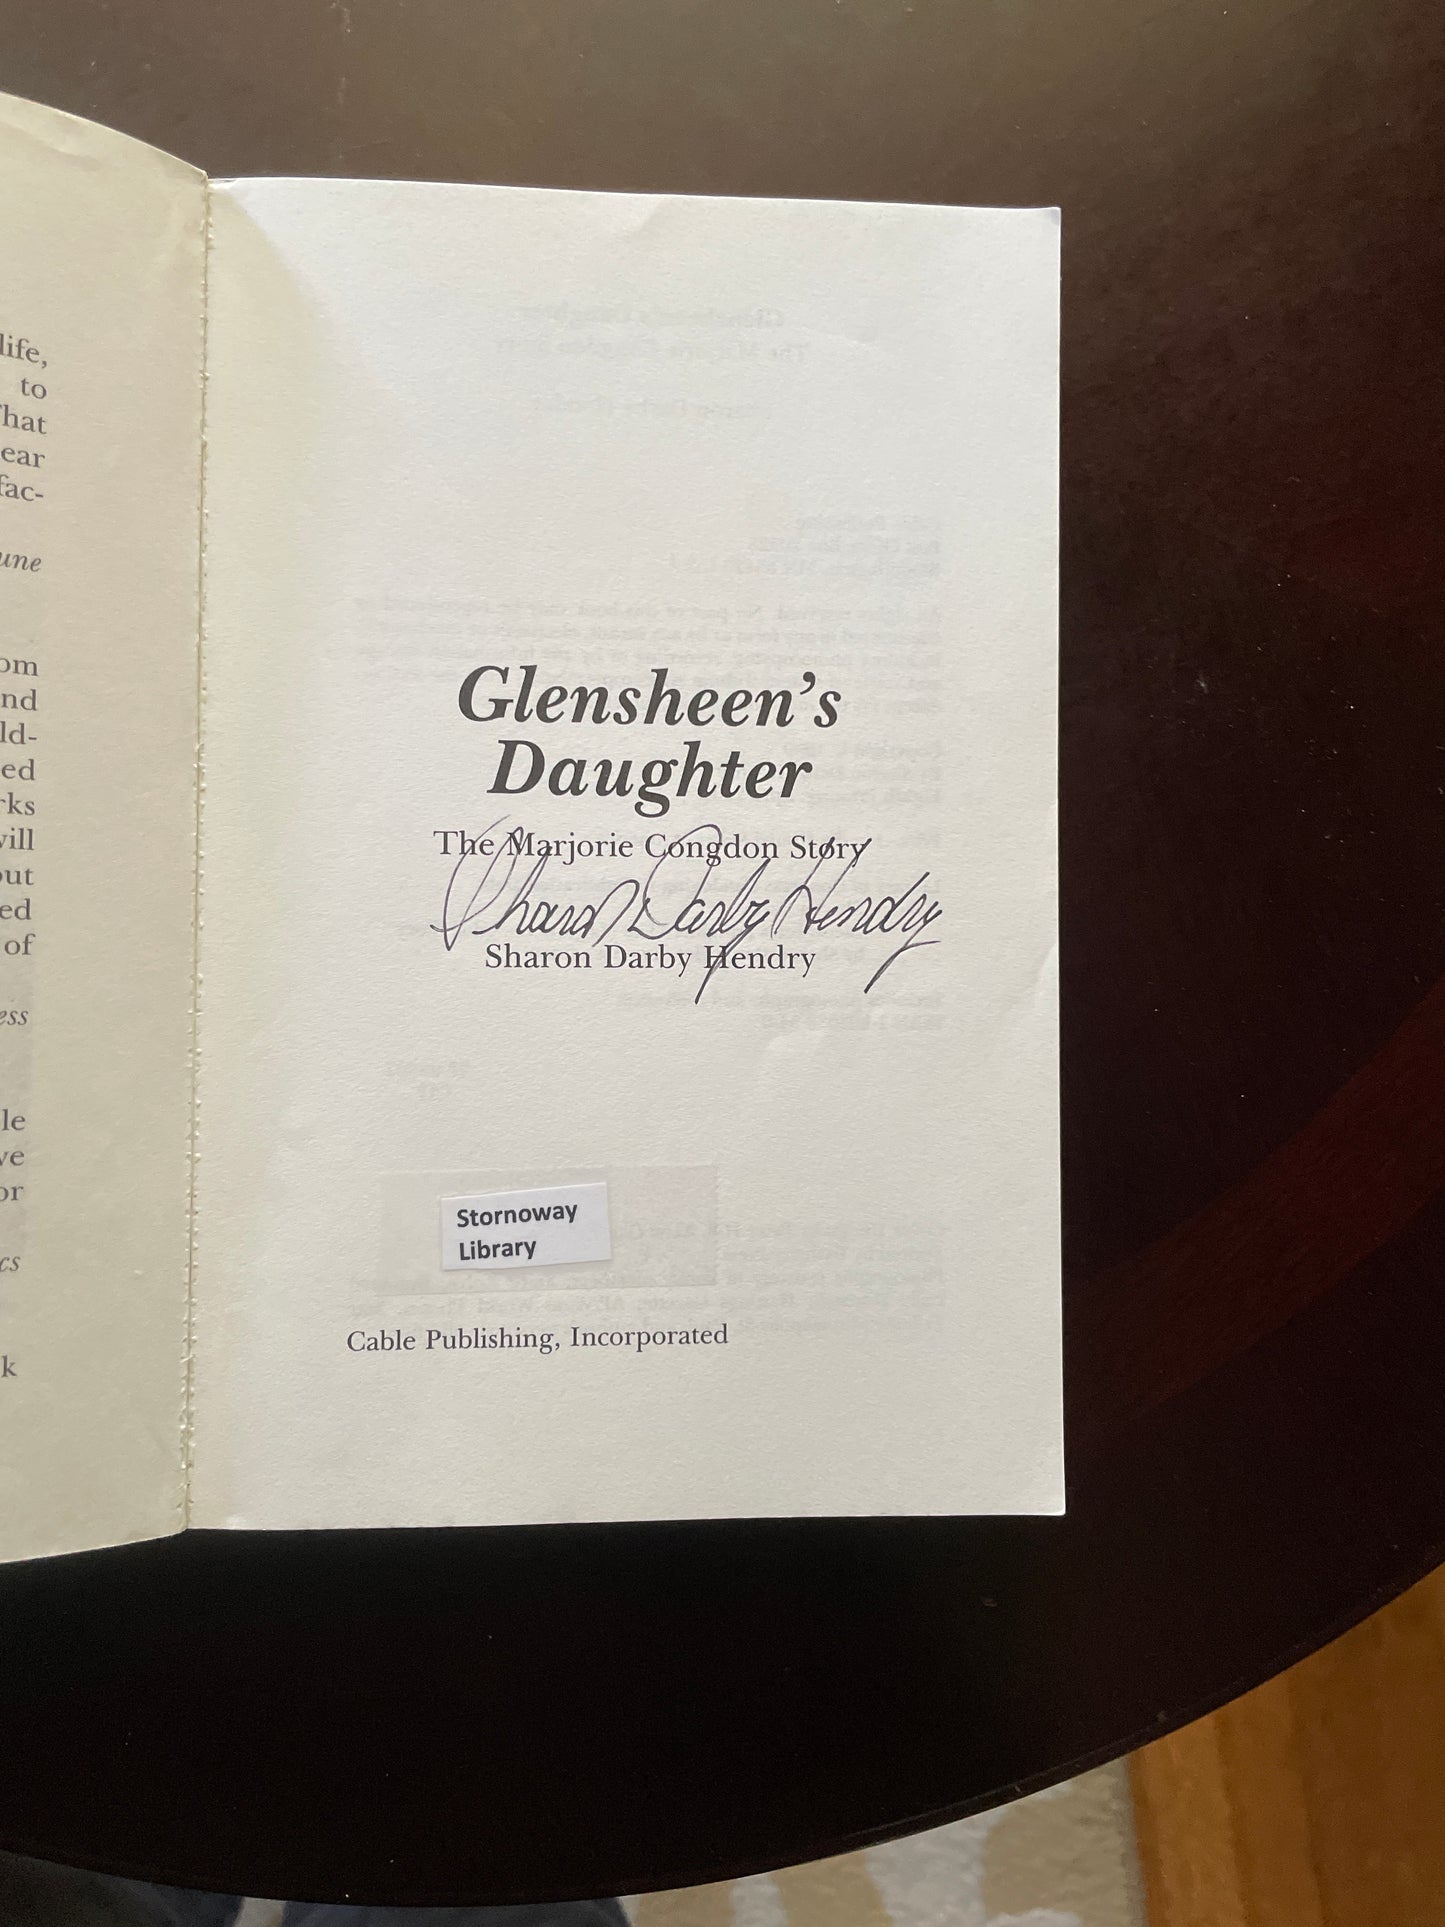 Glensheen's Daughter: The Marjorie Congdon Story (Signed) - Hendry, Sharon Darby